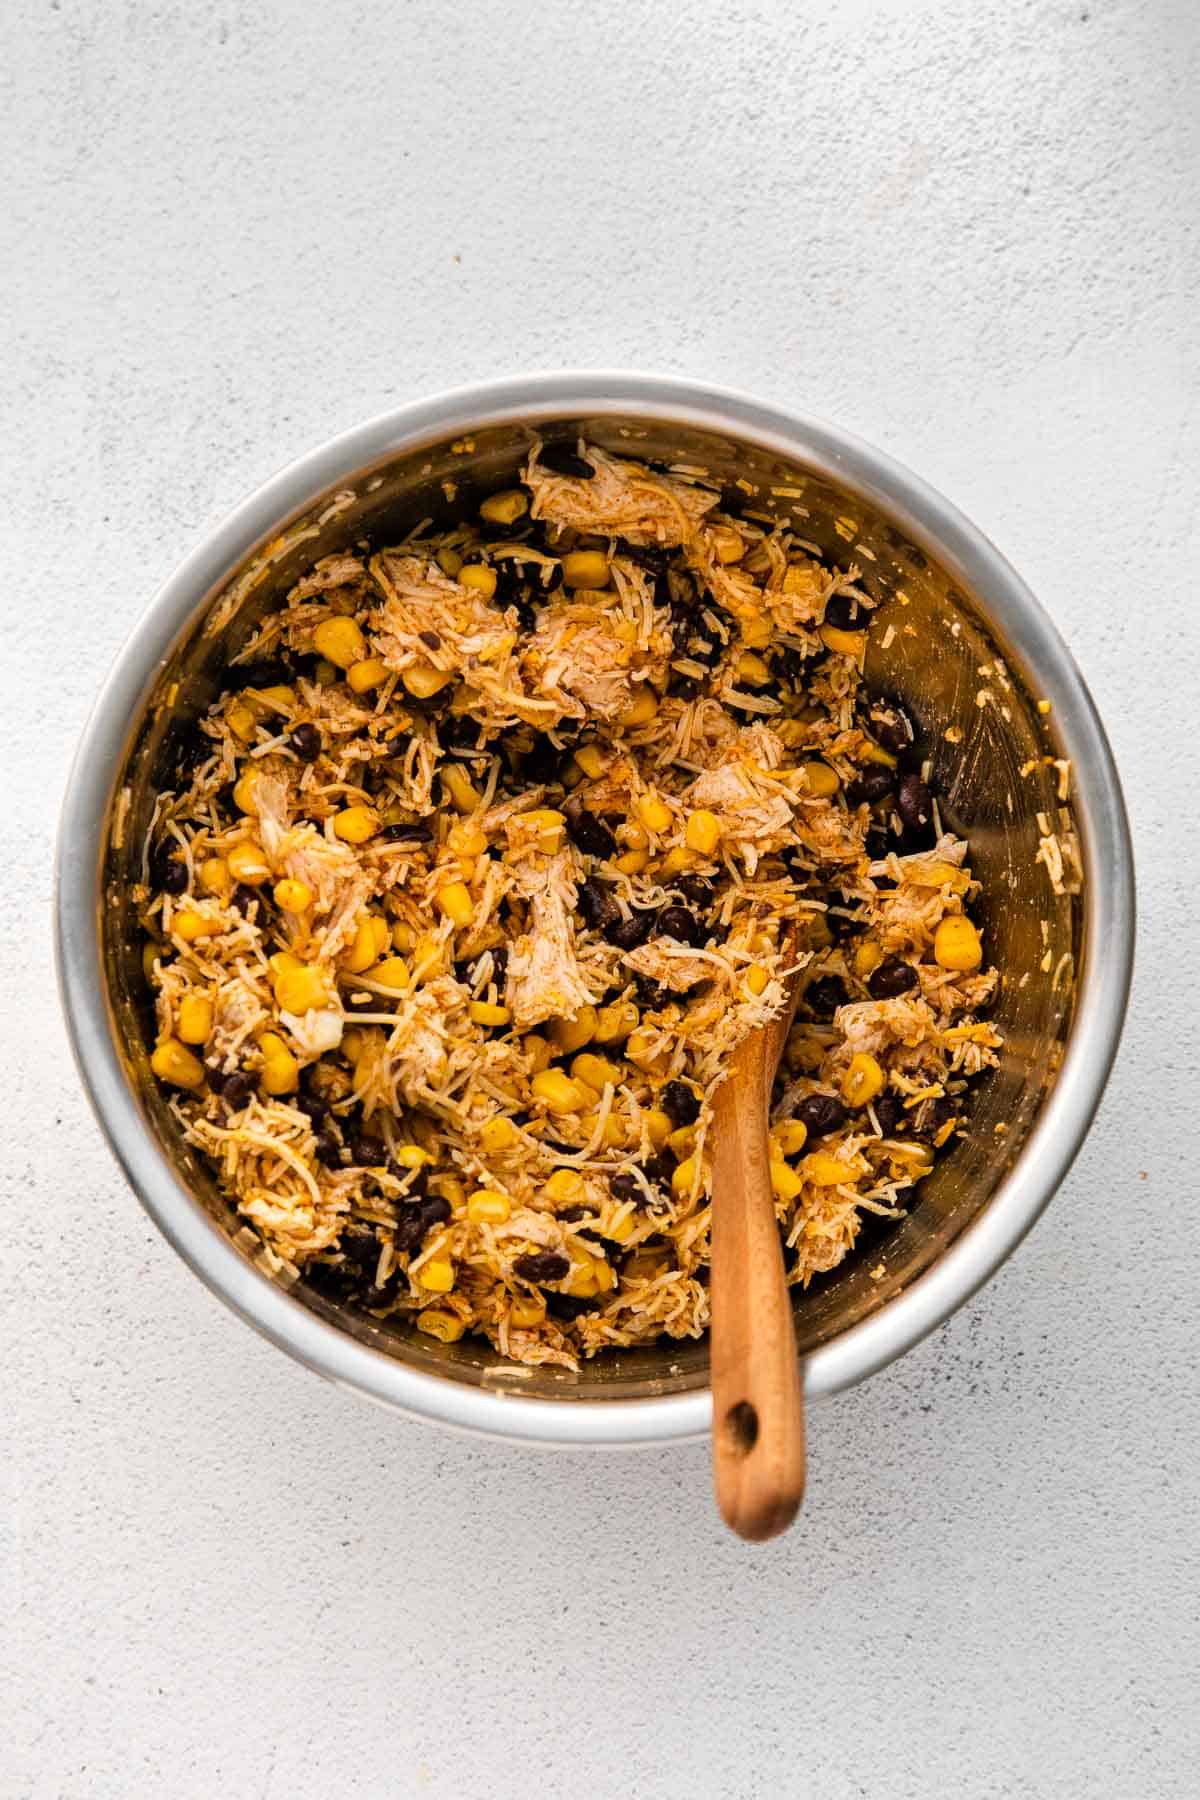 Medium mixing bowl of egg roll filling ingredients mixed together - chicken, cheese, beans, corn, chili powder, garlic powder, cumin, and paprika.